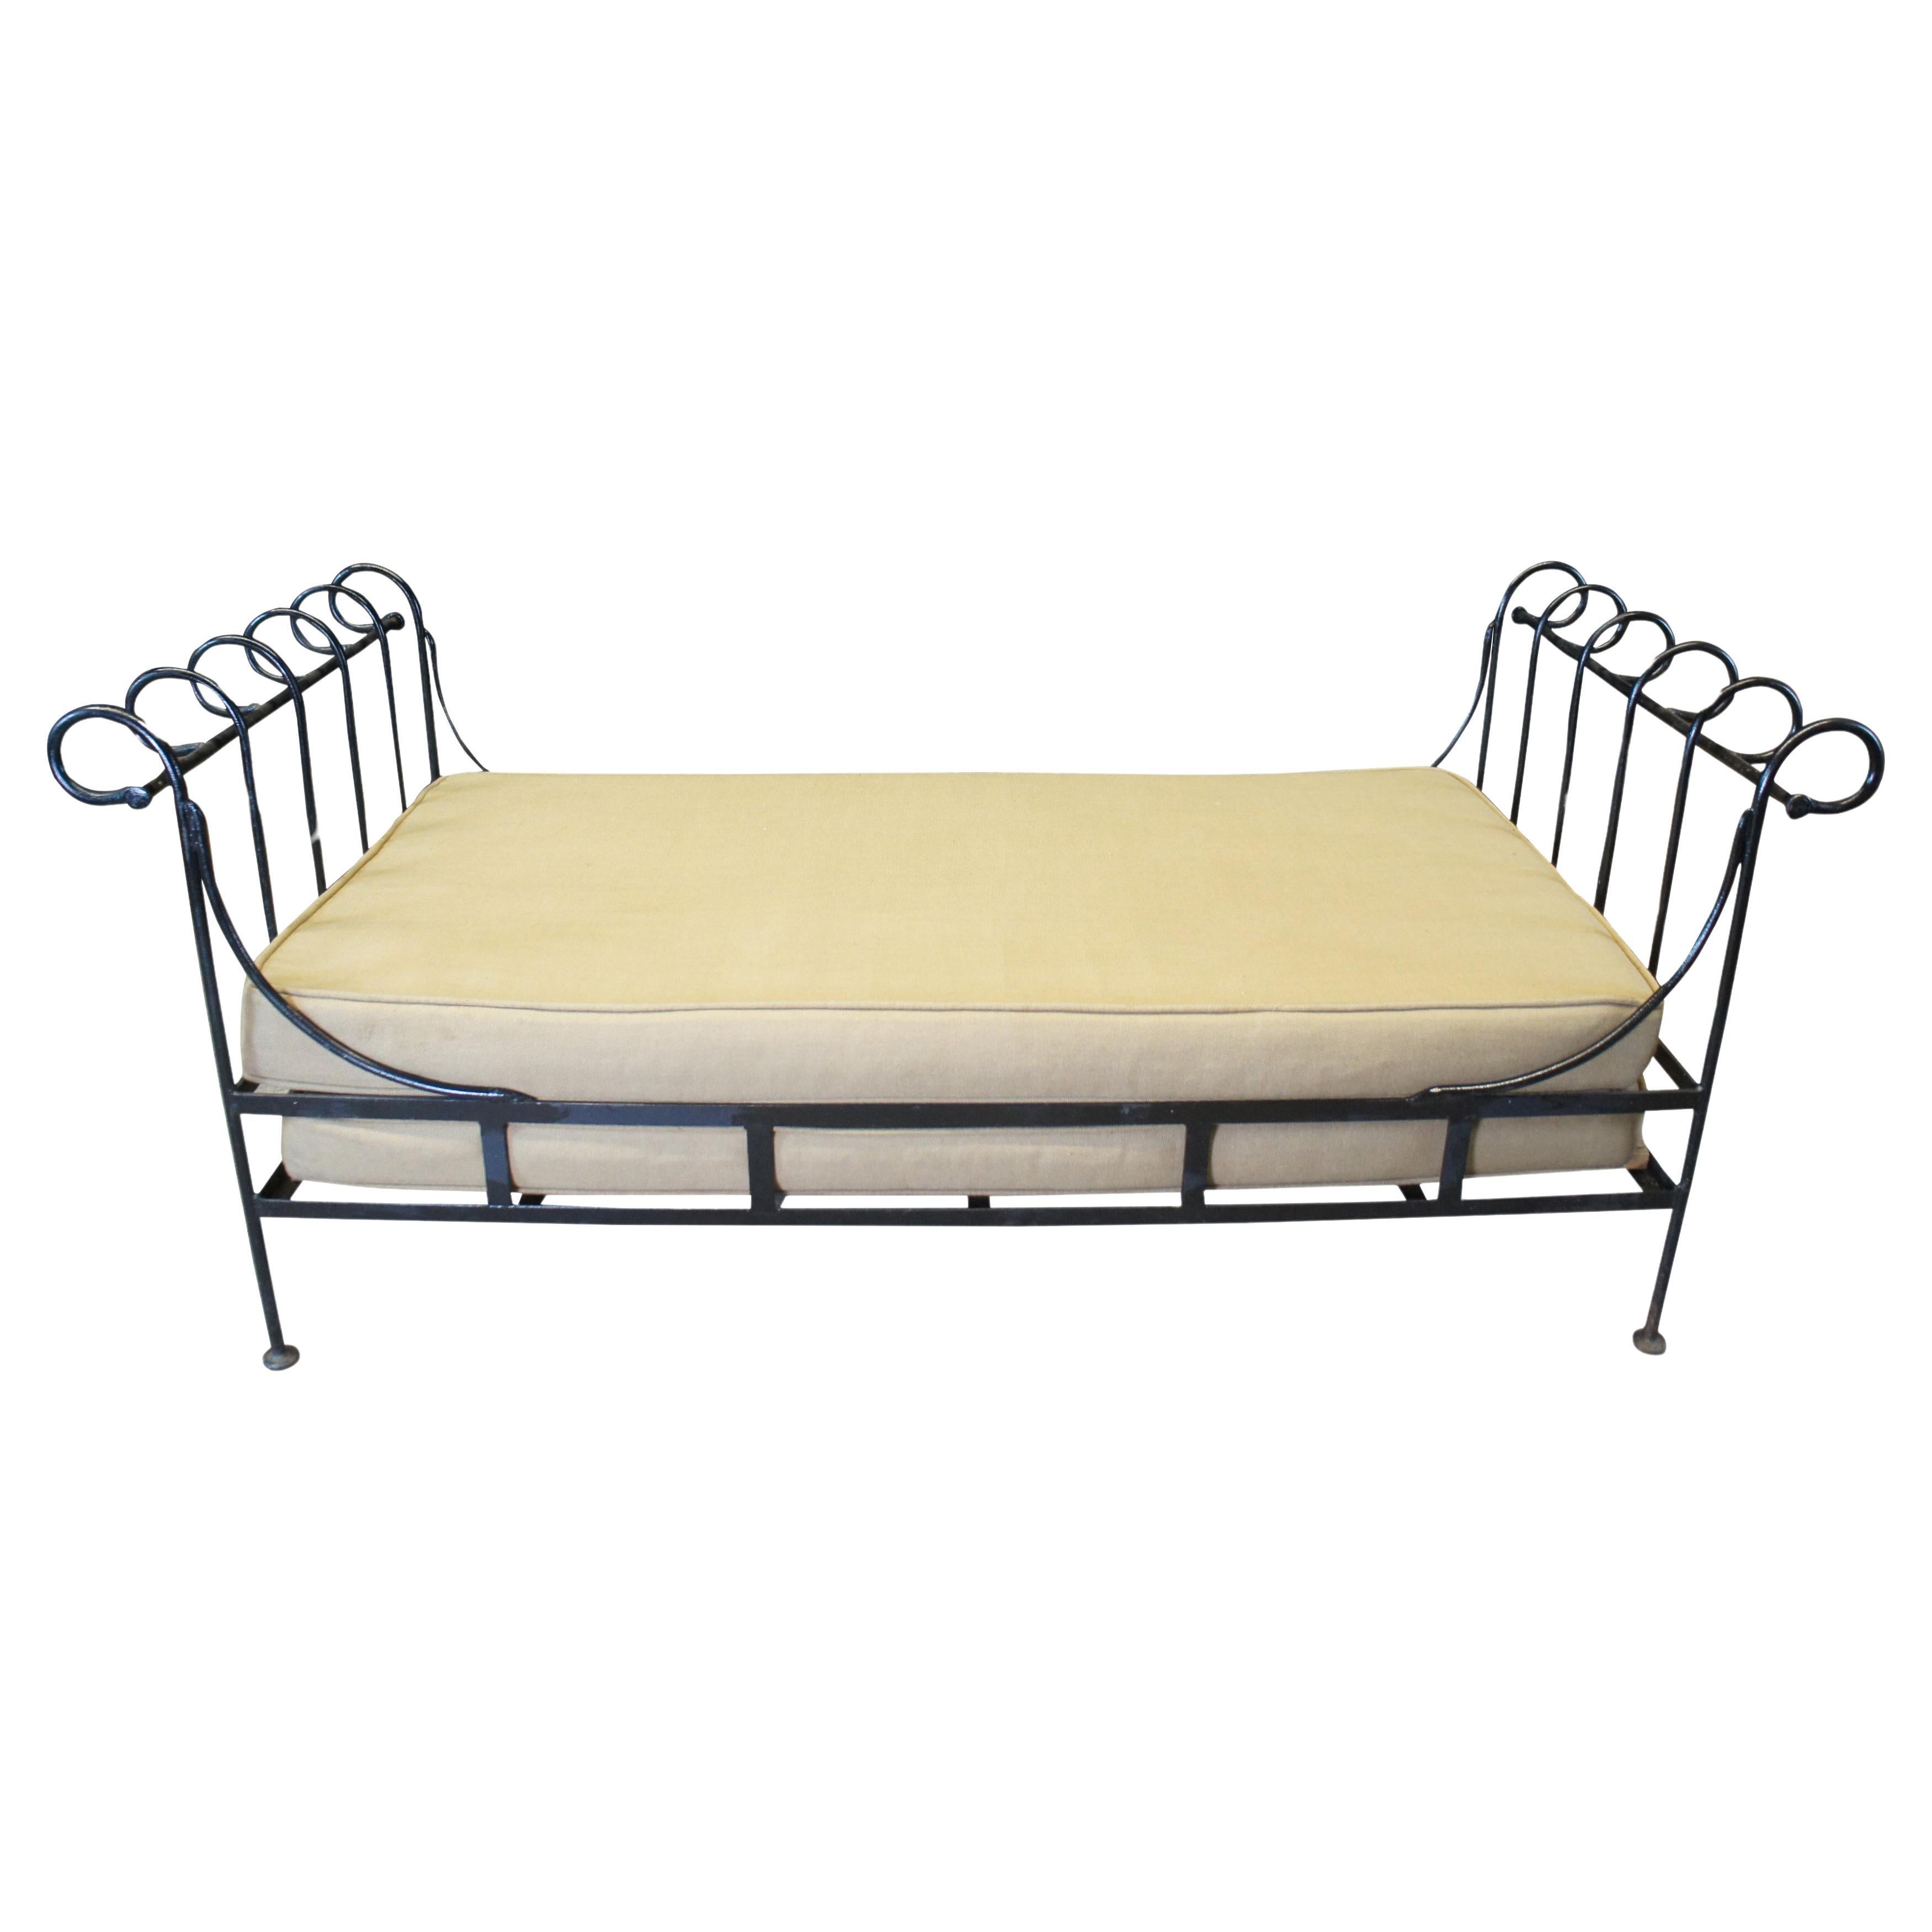 Vintage Neoclassical Directoire Style Scrolled Iron Outdoor Daybed Sofa 72" For Sale